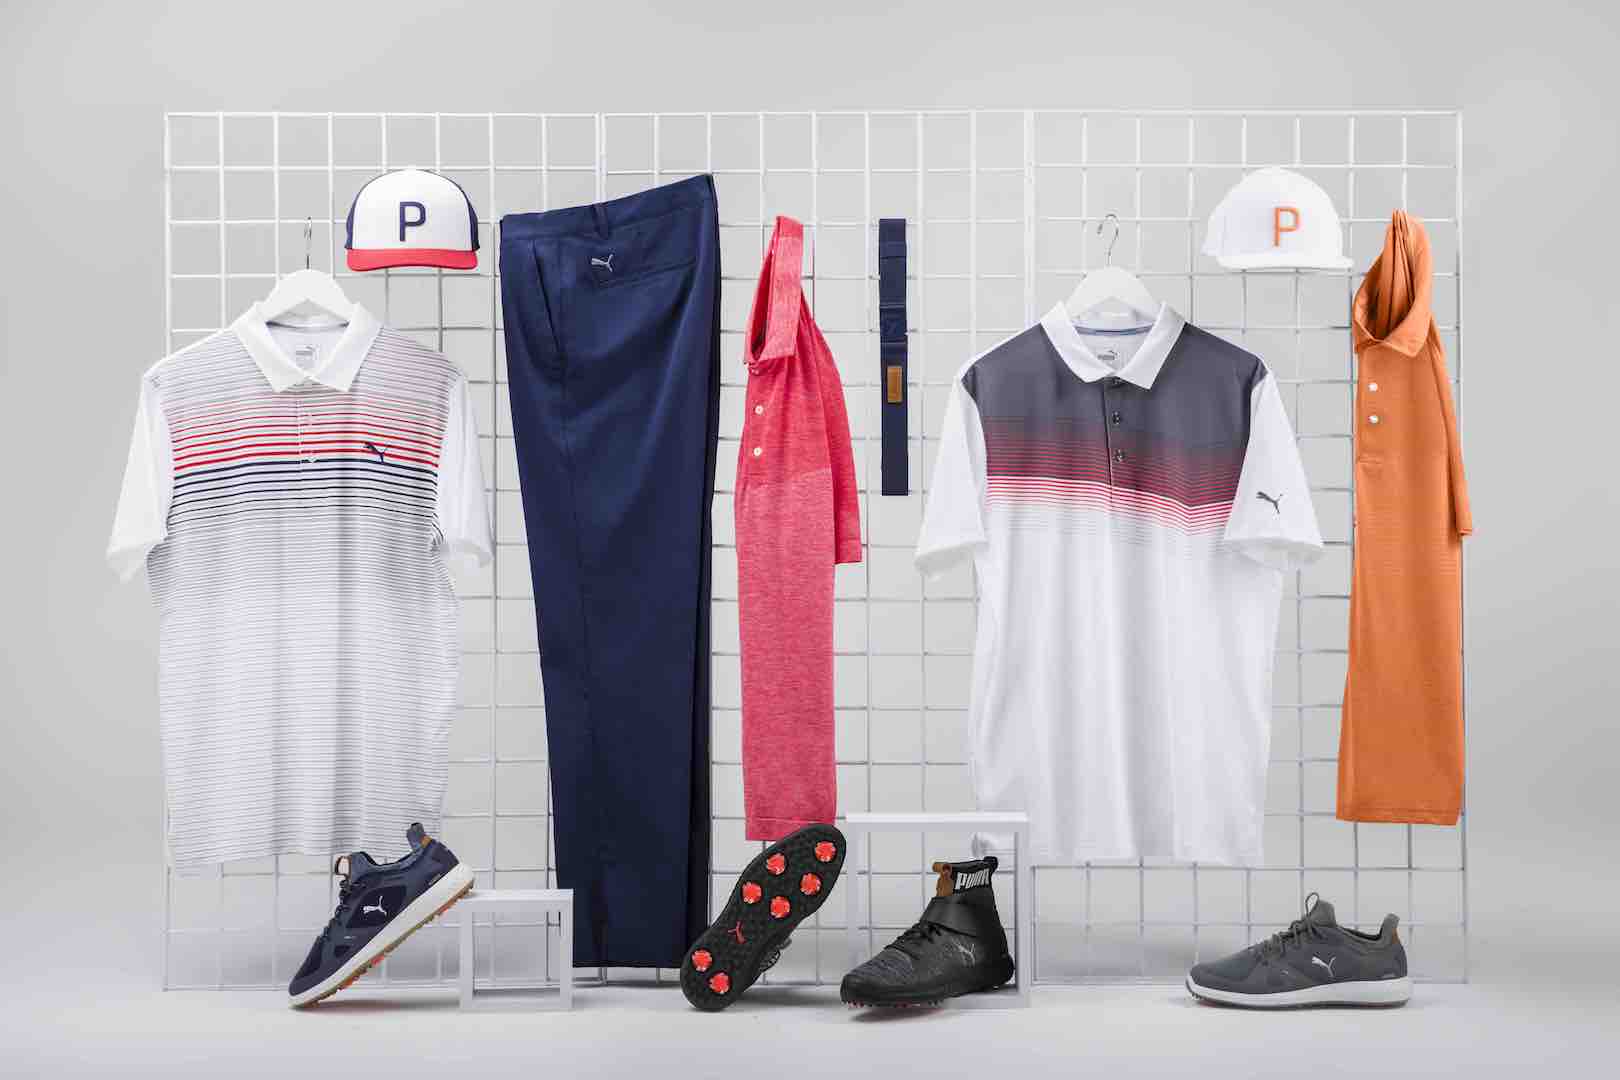 Rickie Fowler's looks for the 118th US Open